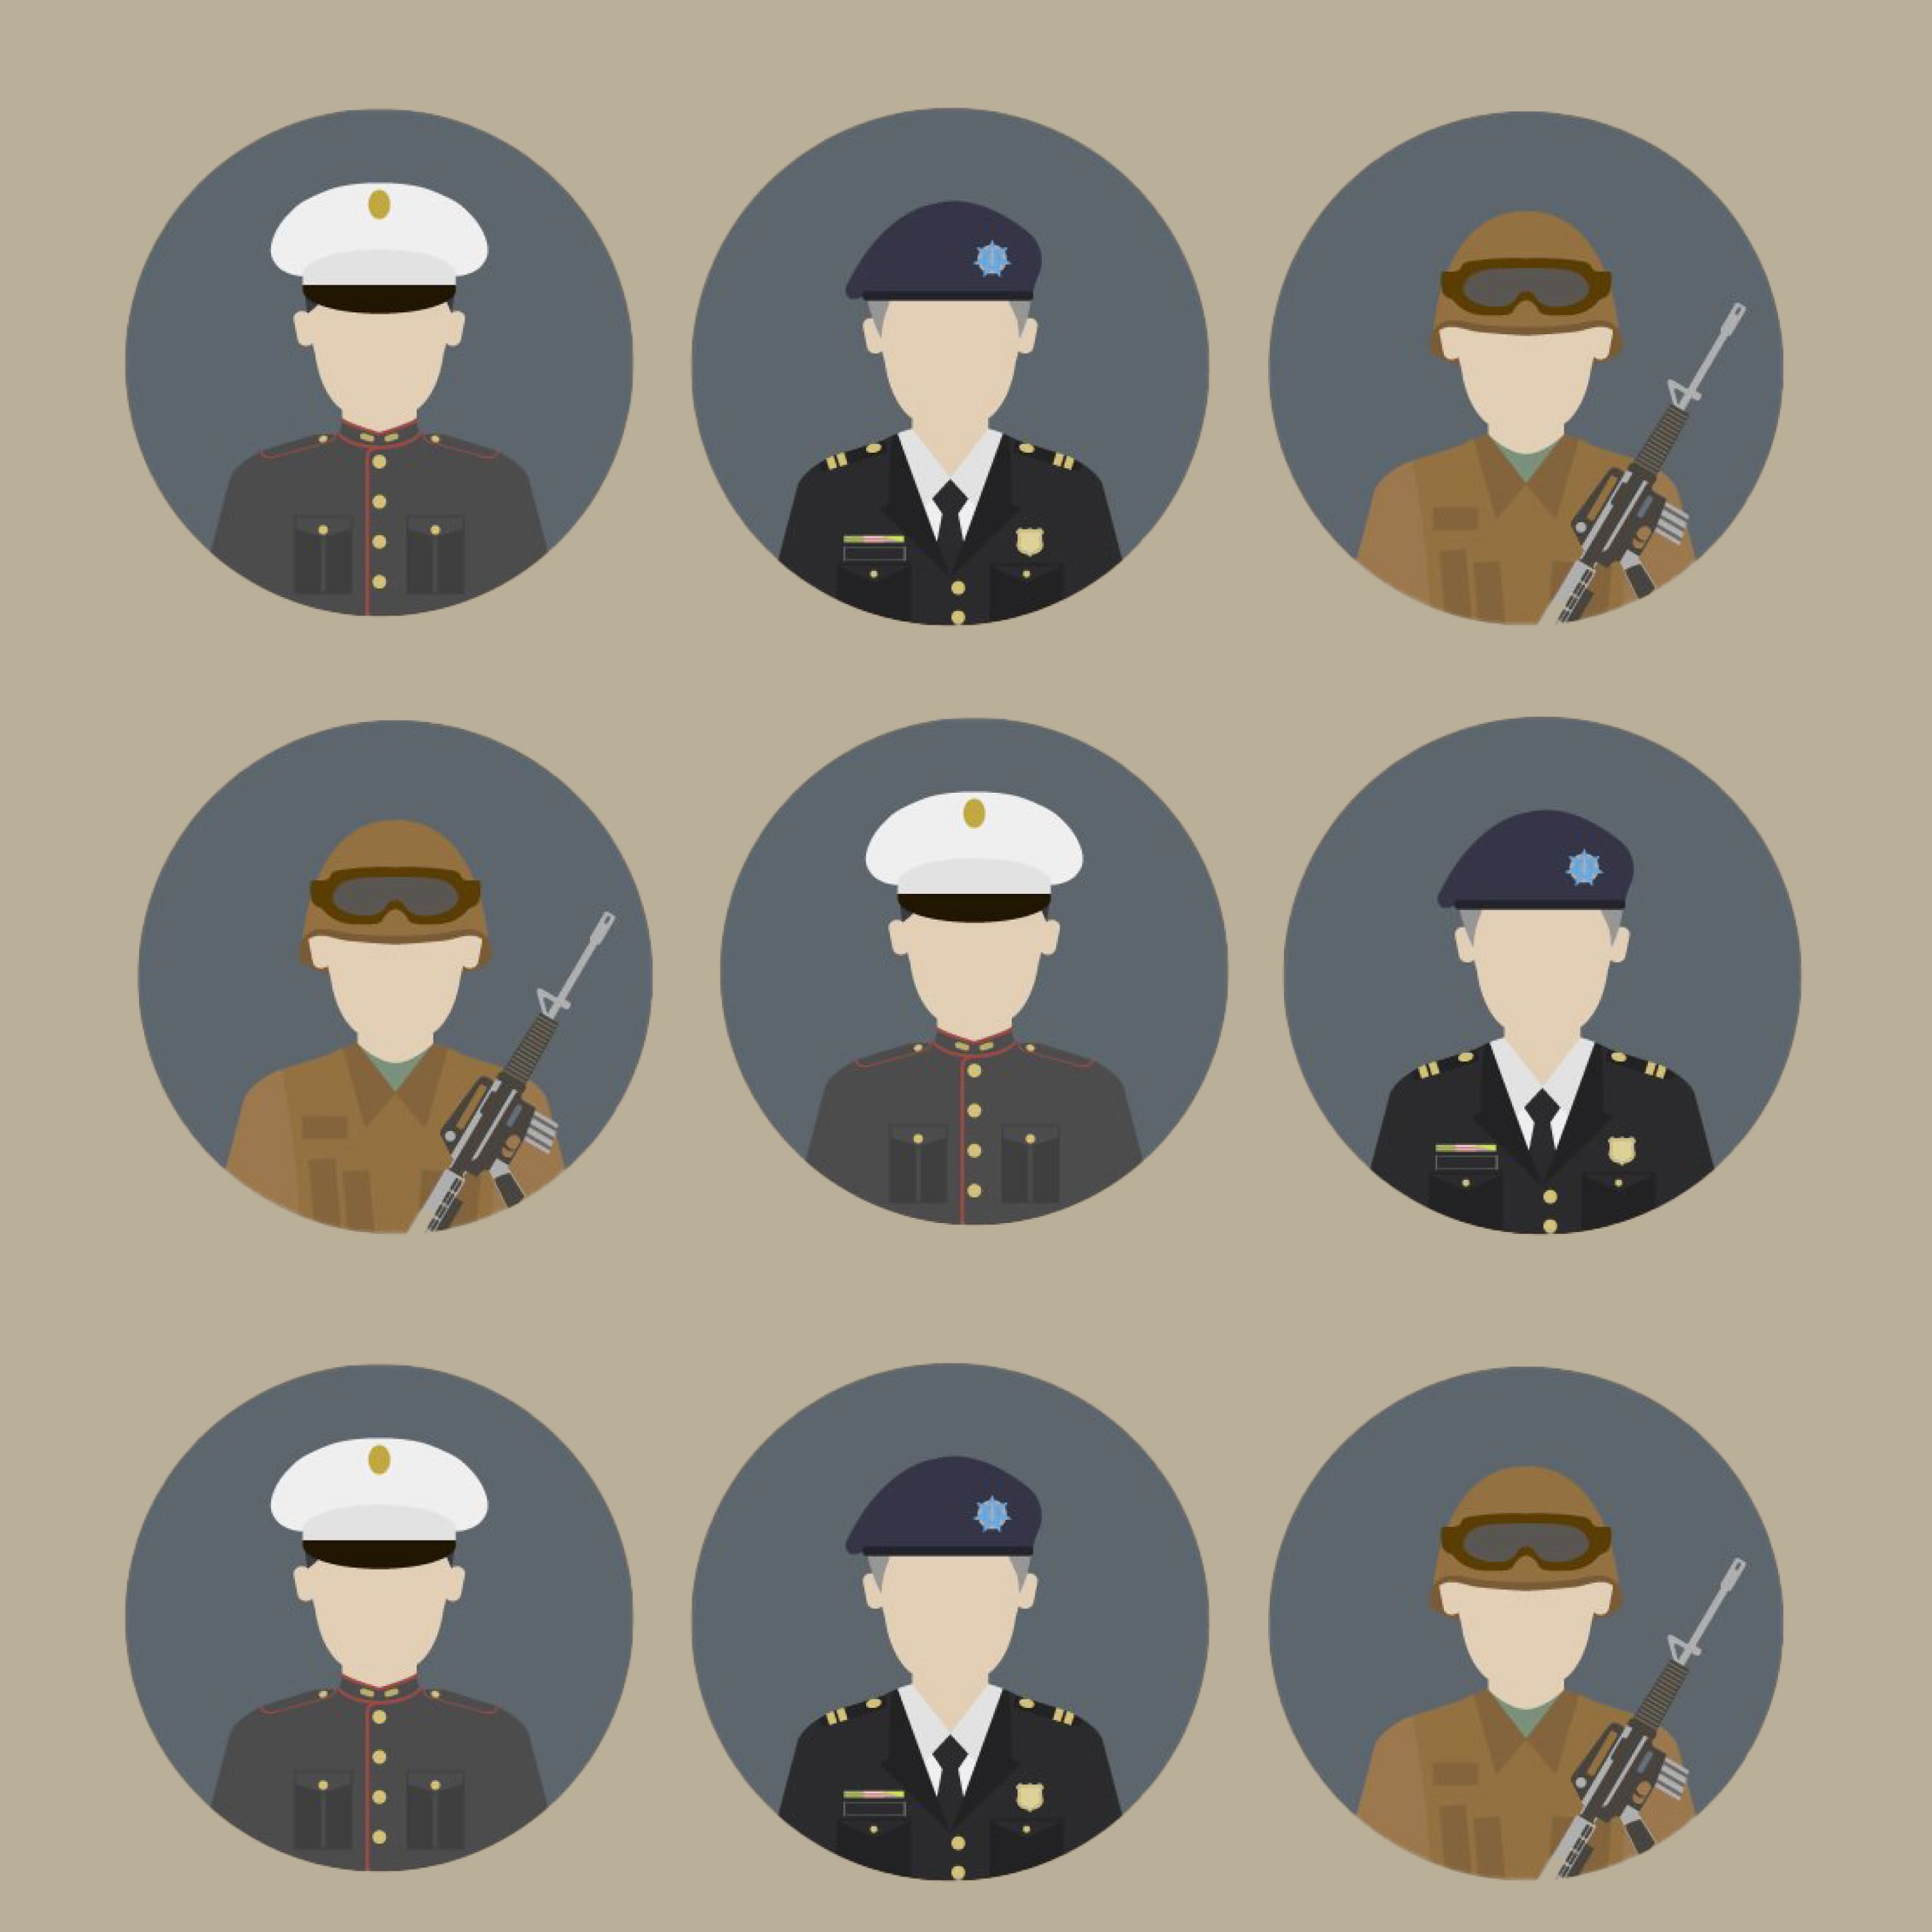 Images of soldiers in various military uniforms.